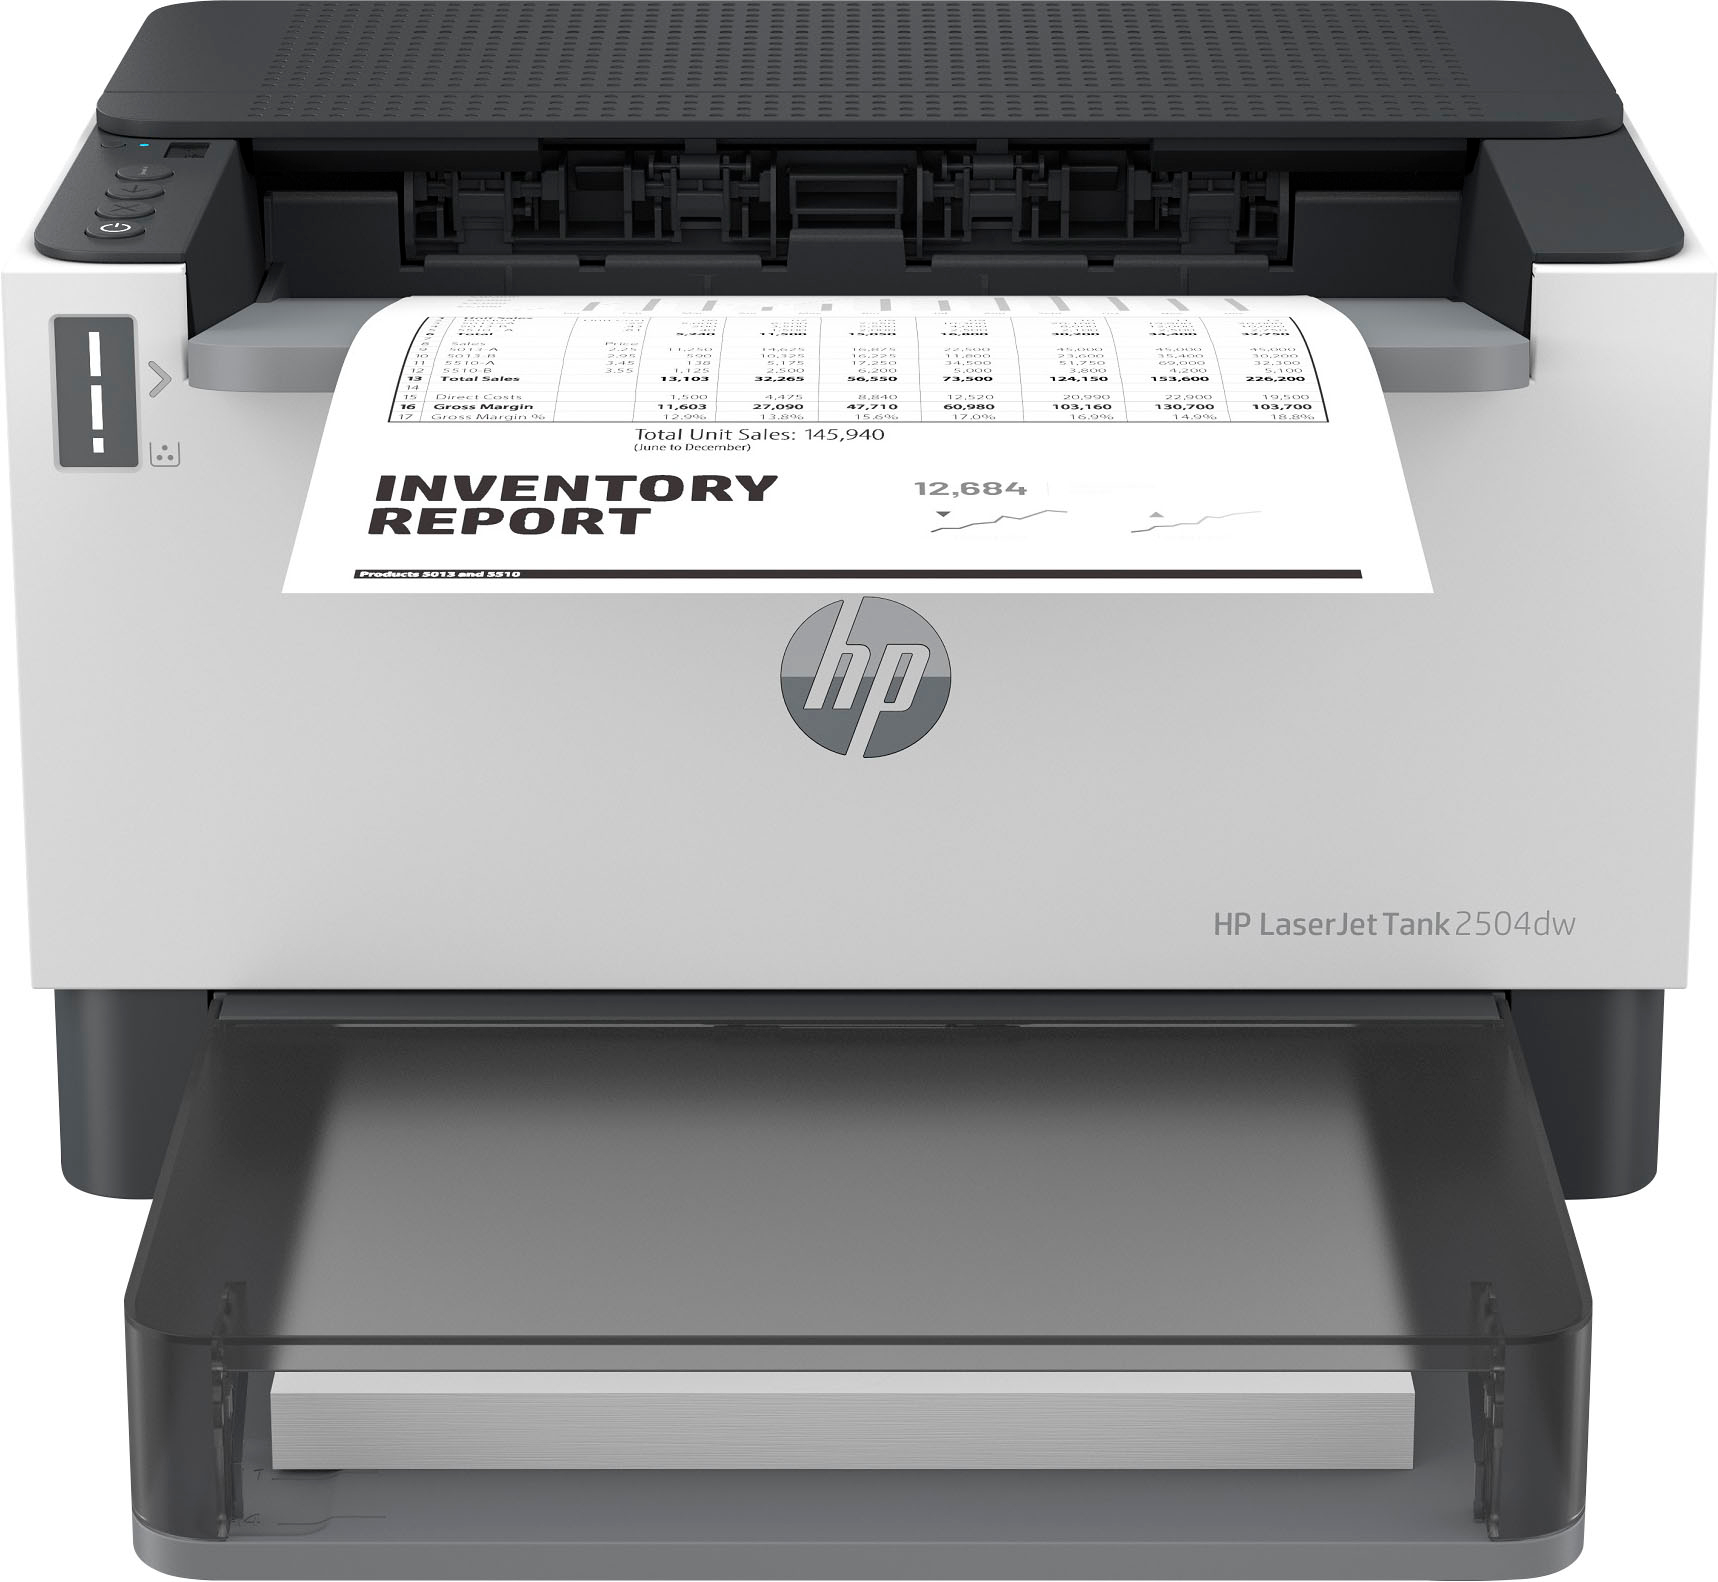 Effectiviteit Peregrination Raad HP LaserJet Tank 2504dw Wireless Black-and-White Laser Printer preloaded  with up to 2 years of toner White LaserJet Tank 2504dw - Best Buy